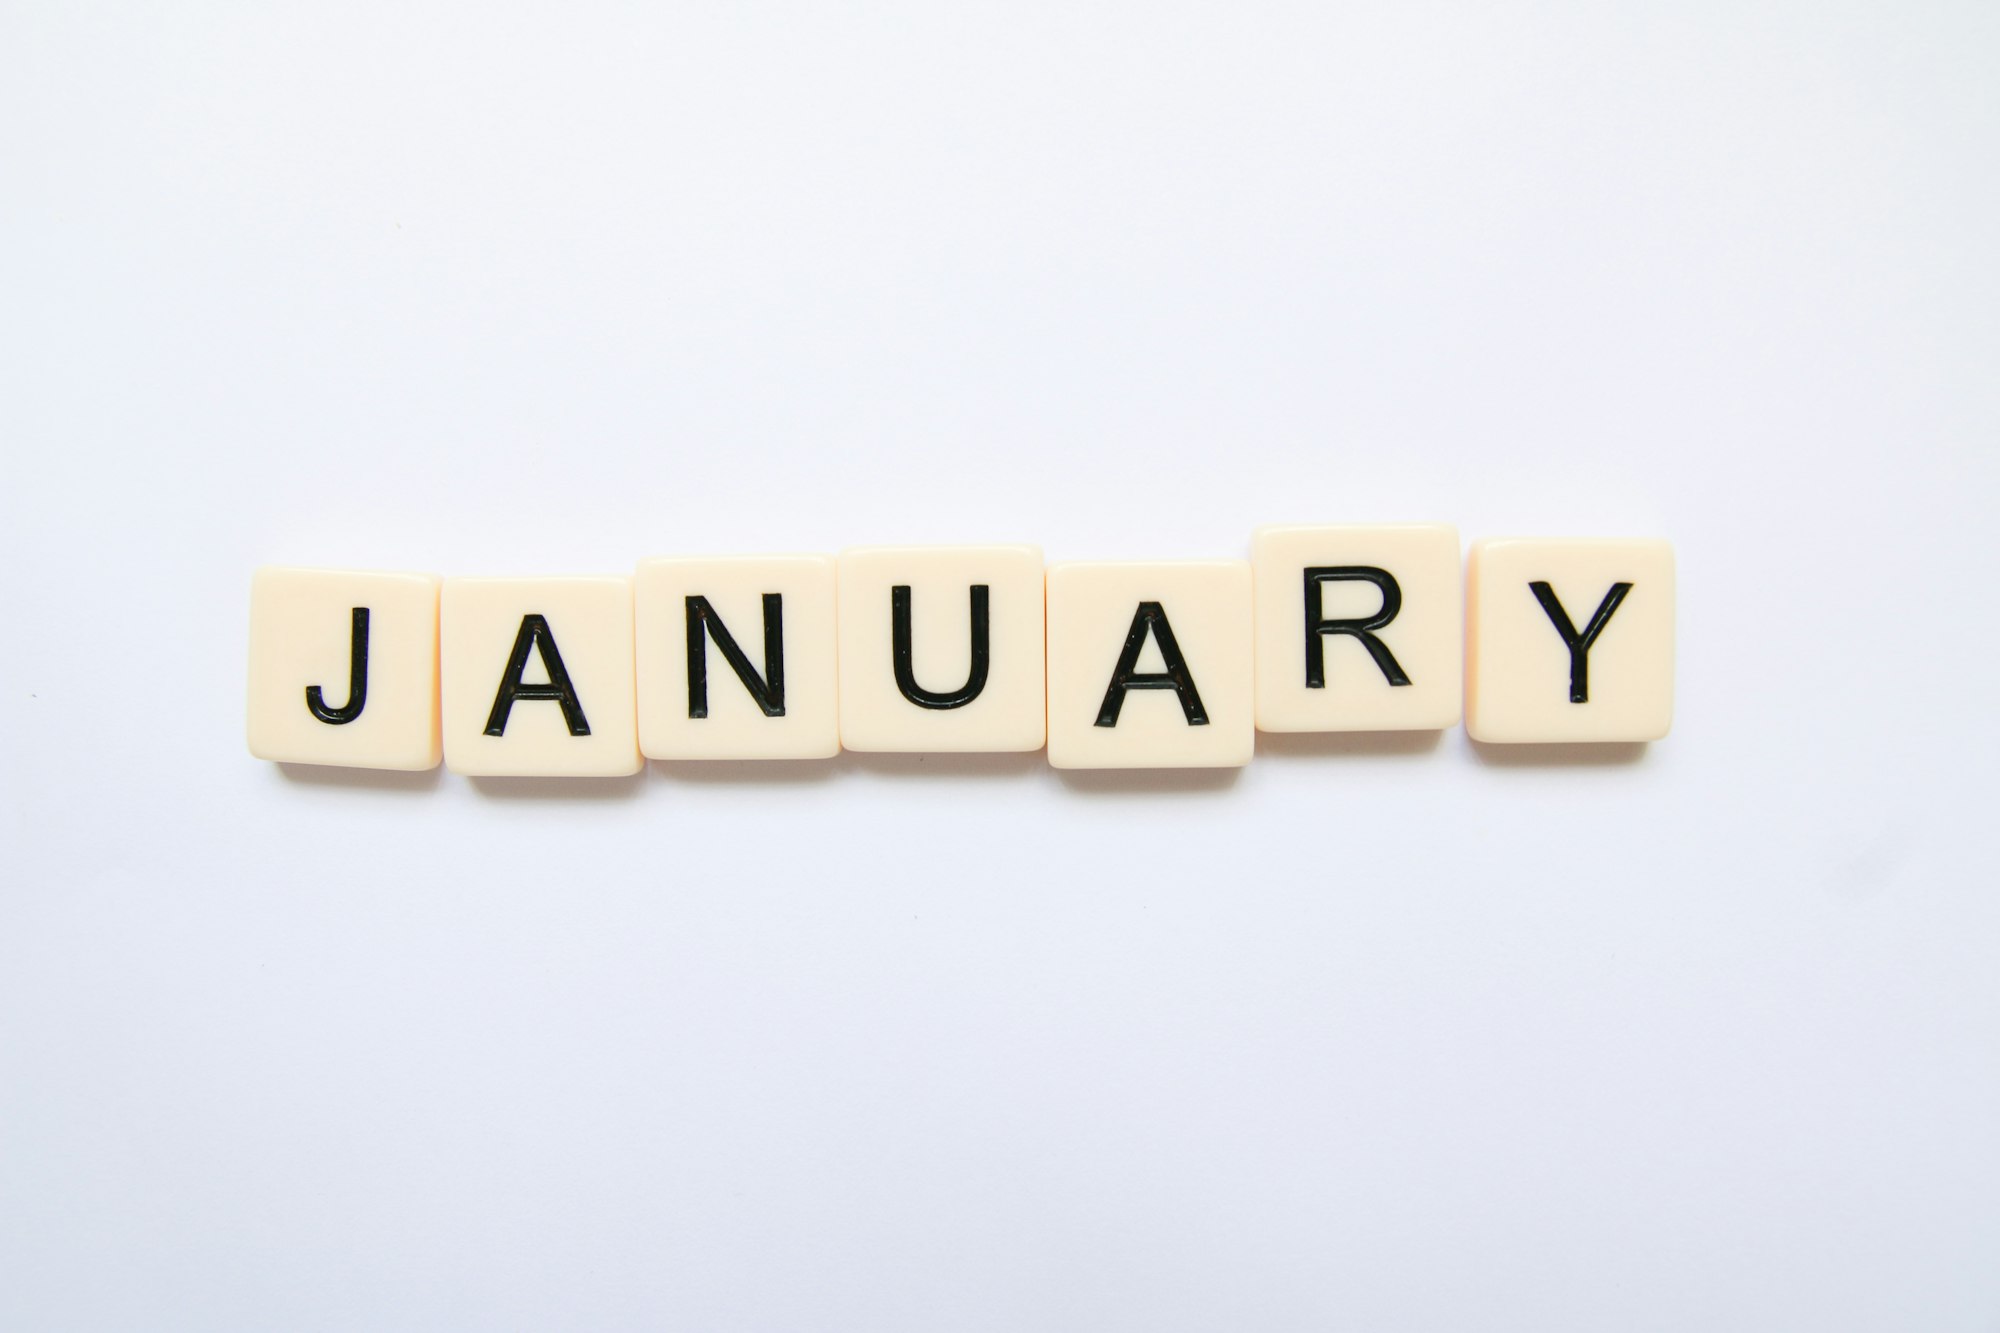 The 45 days of January